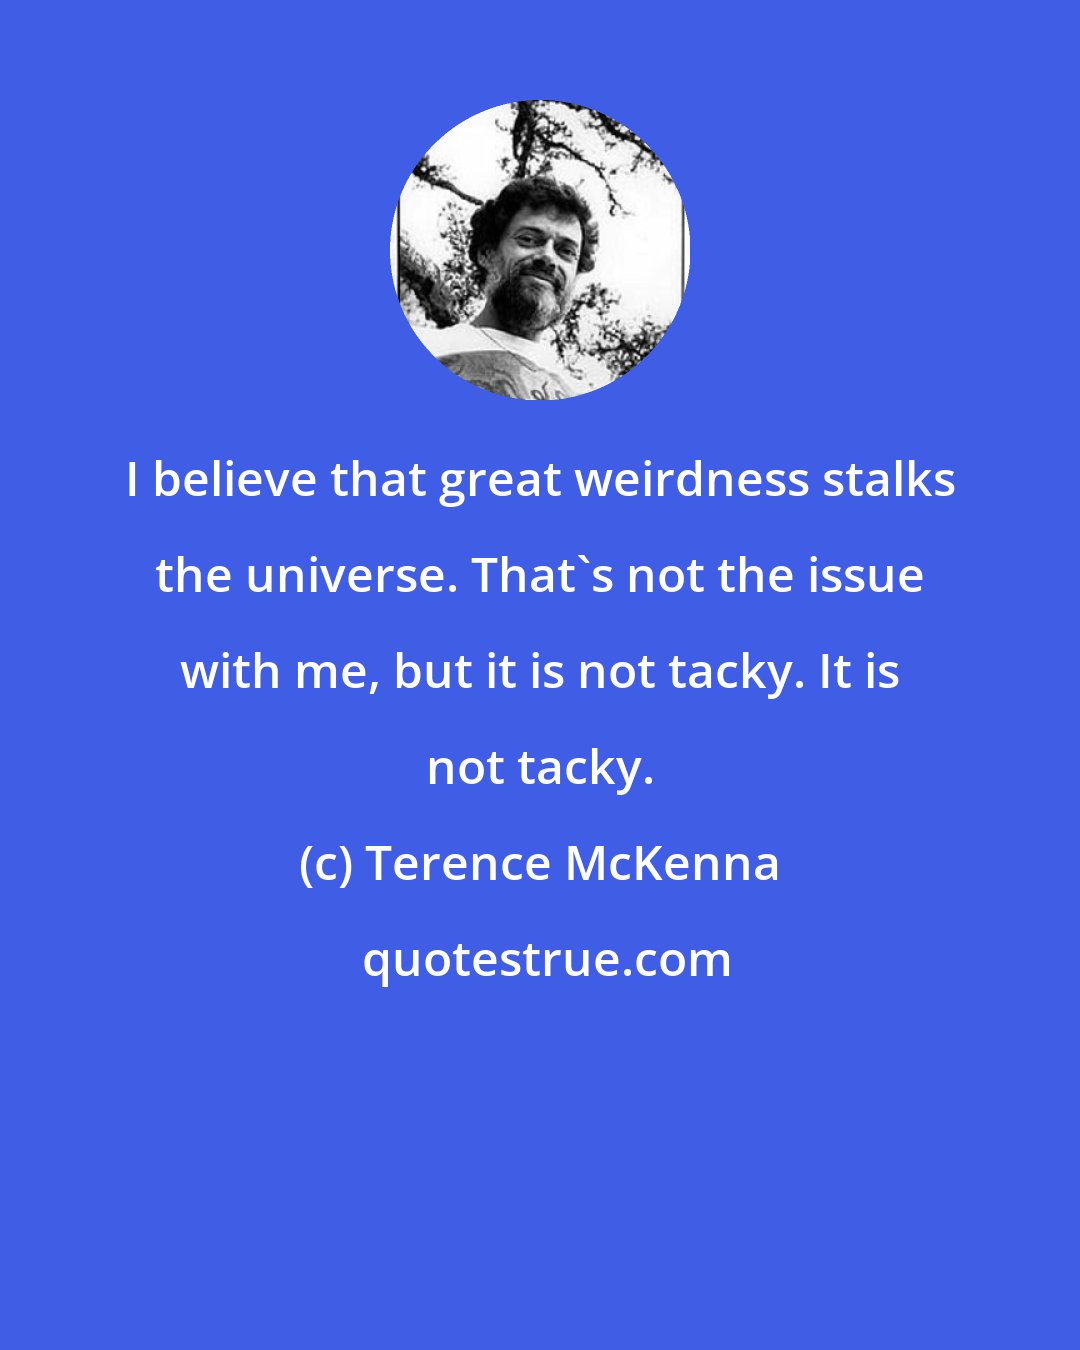 Terence McKenna: I believe that great weirdness stalks the universe. That's not the issue with me, but it is not tacky. It is not tacky.